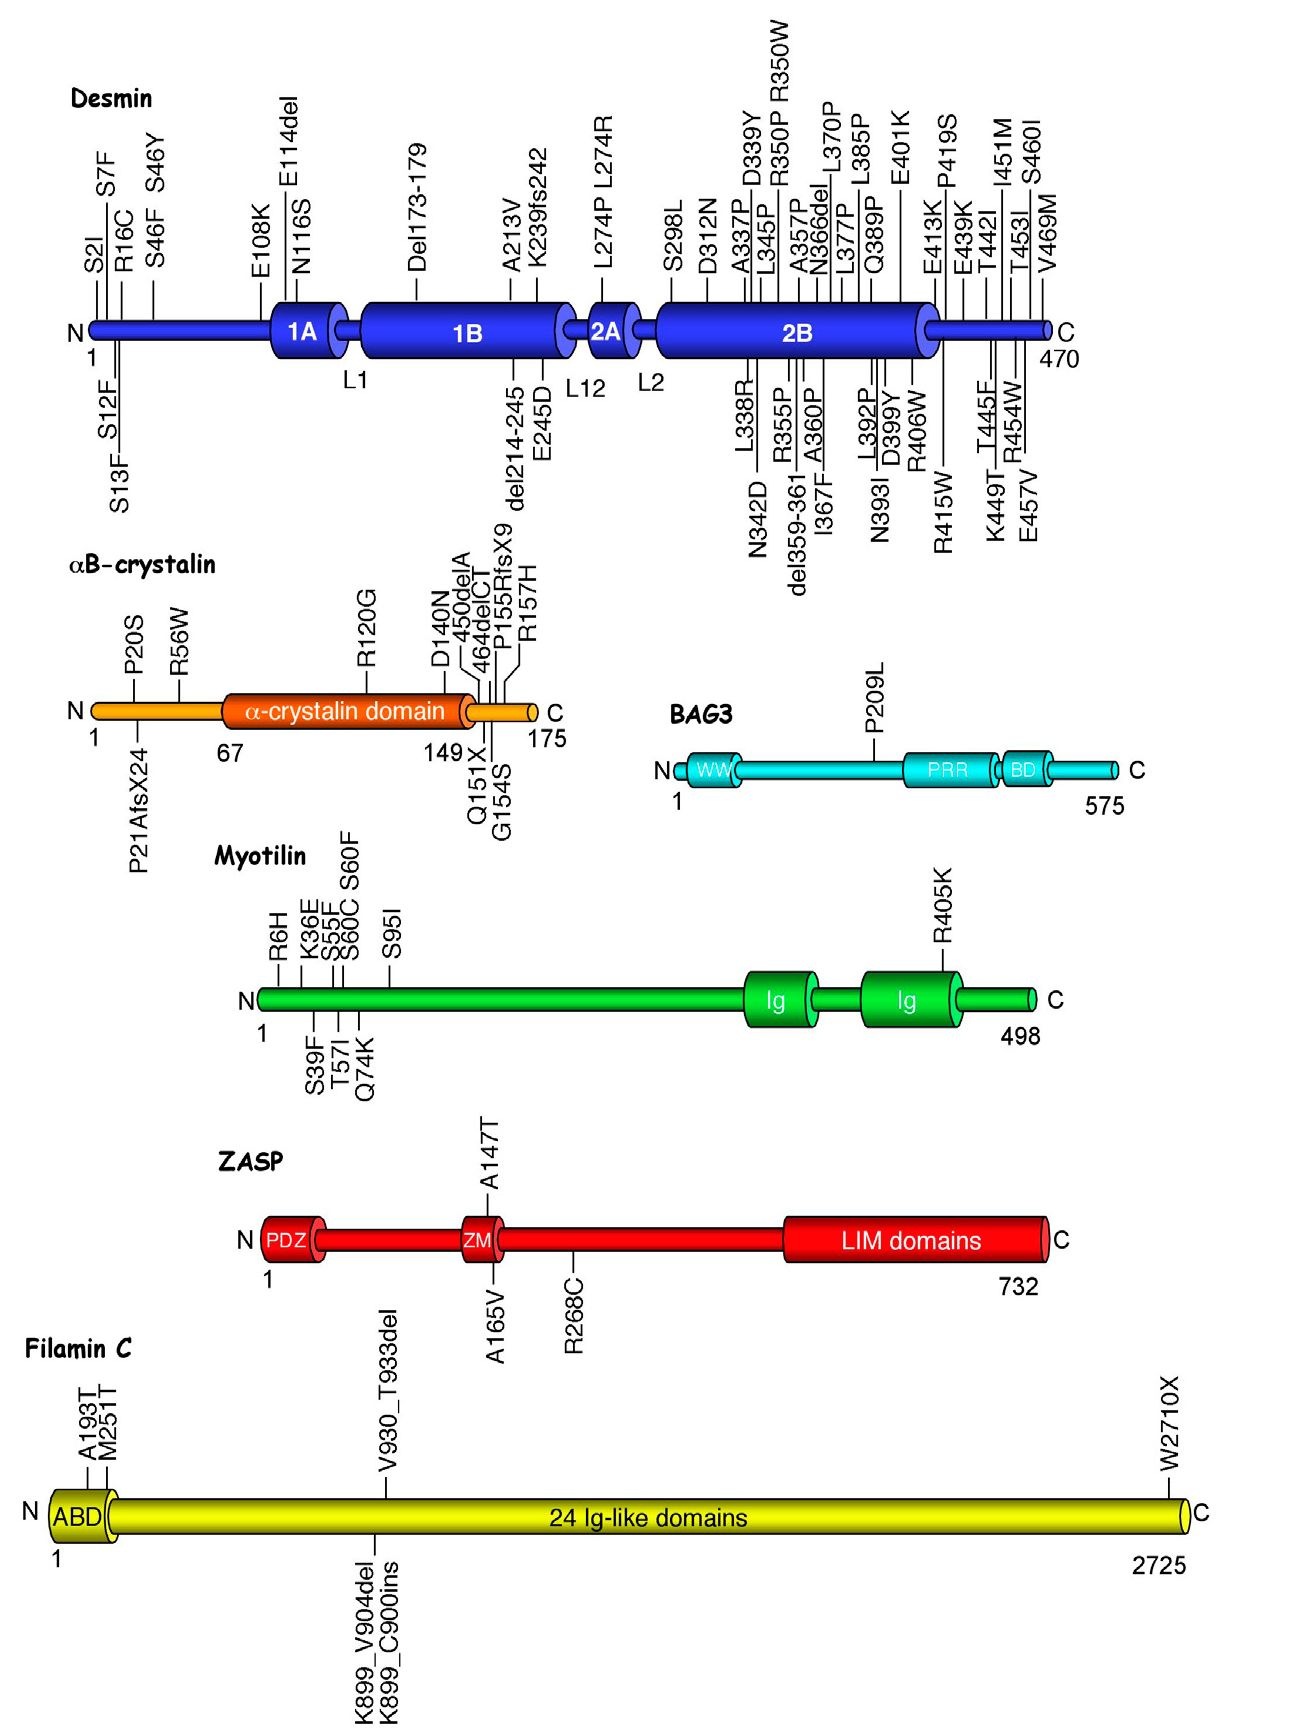 Schematic representation and localization of mutations in the six proteins involved in myofibrilar myopathies.